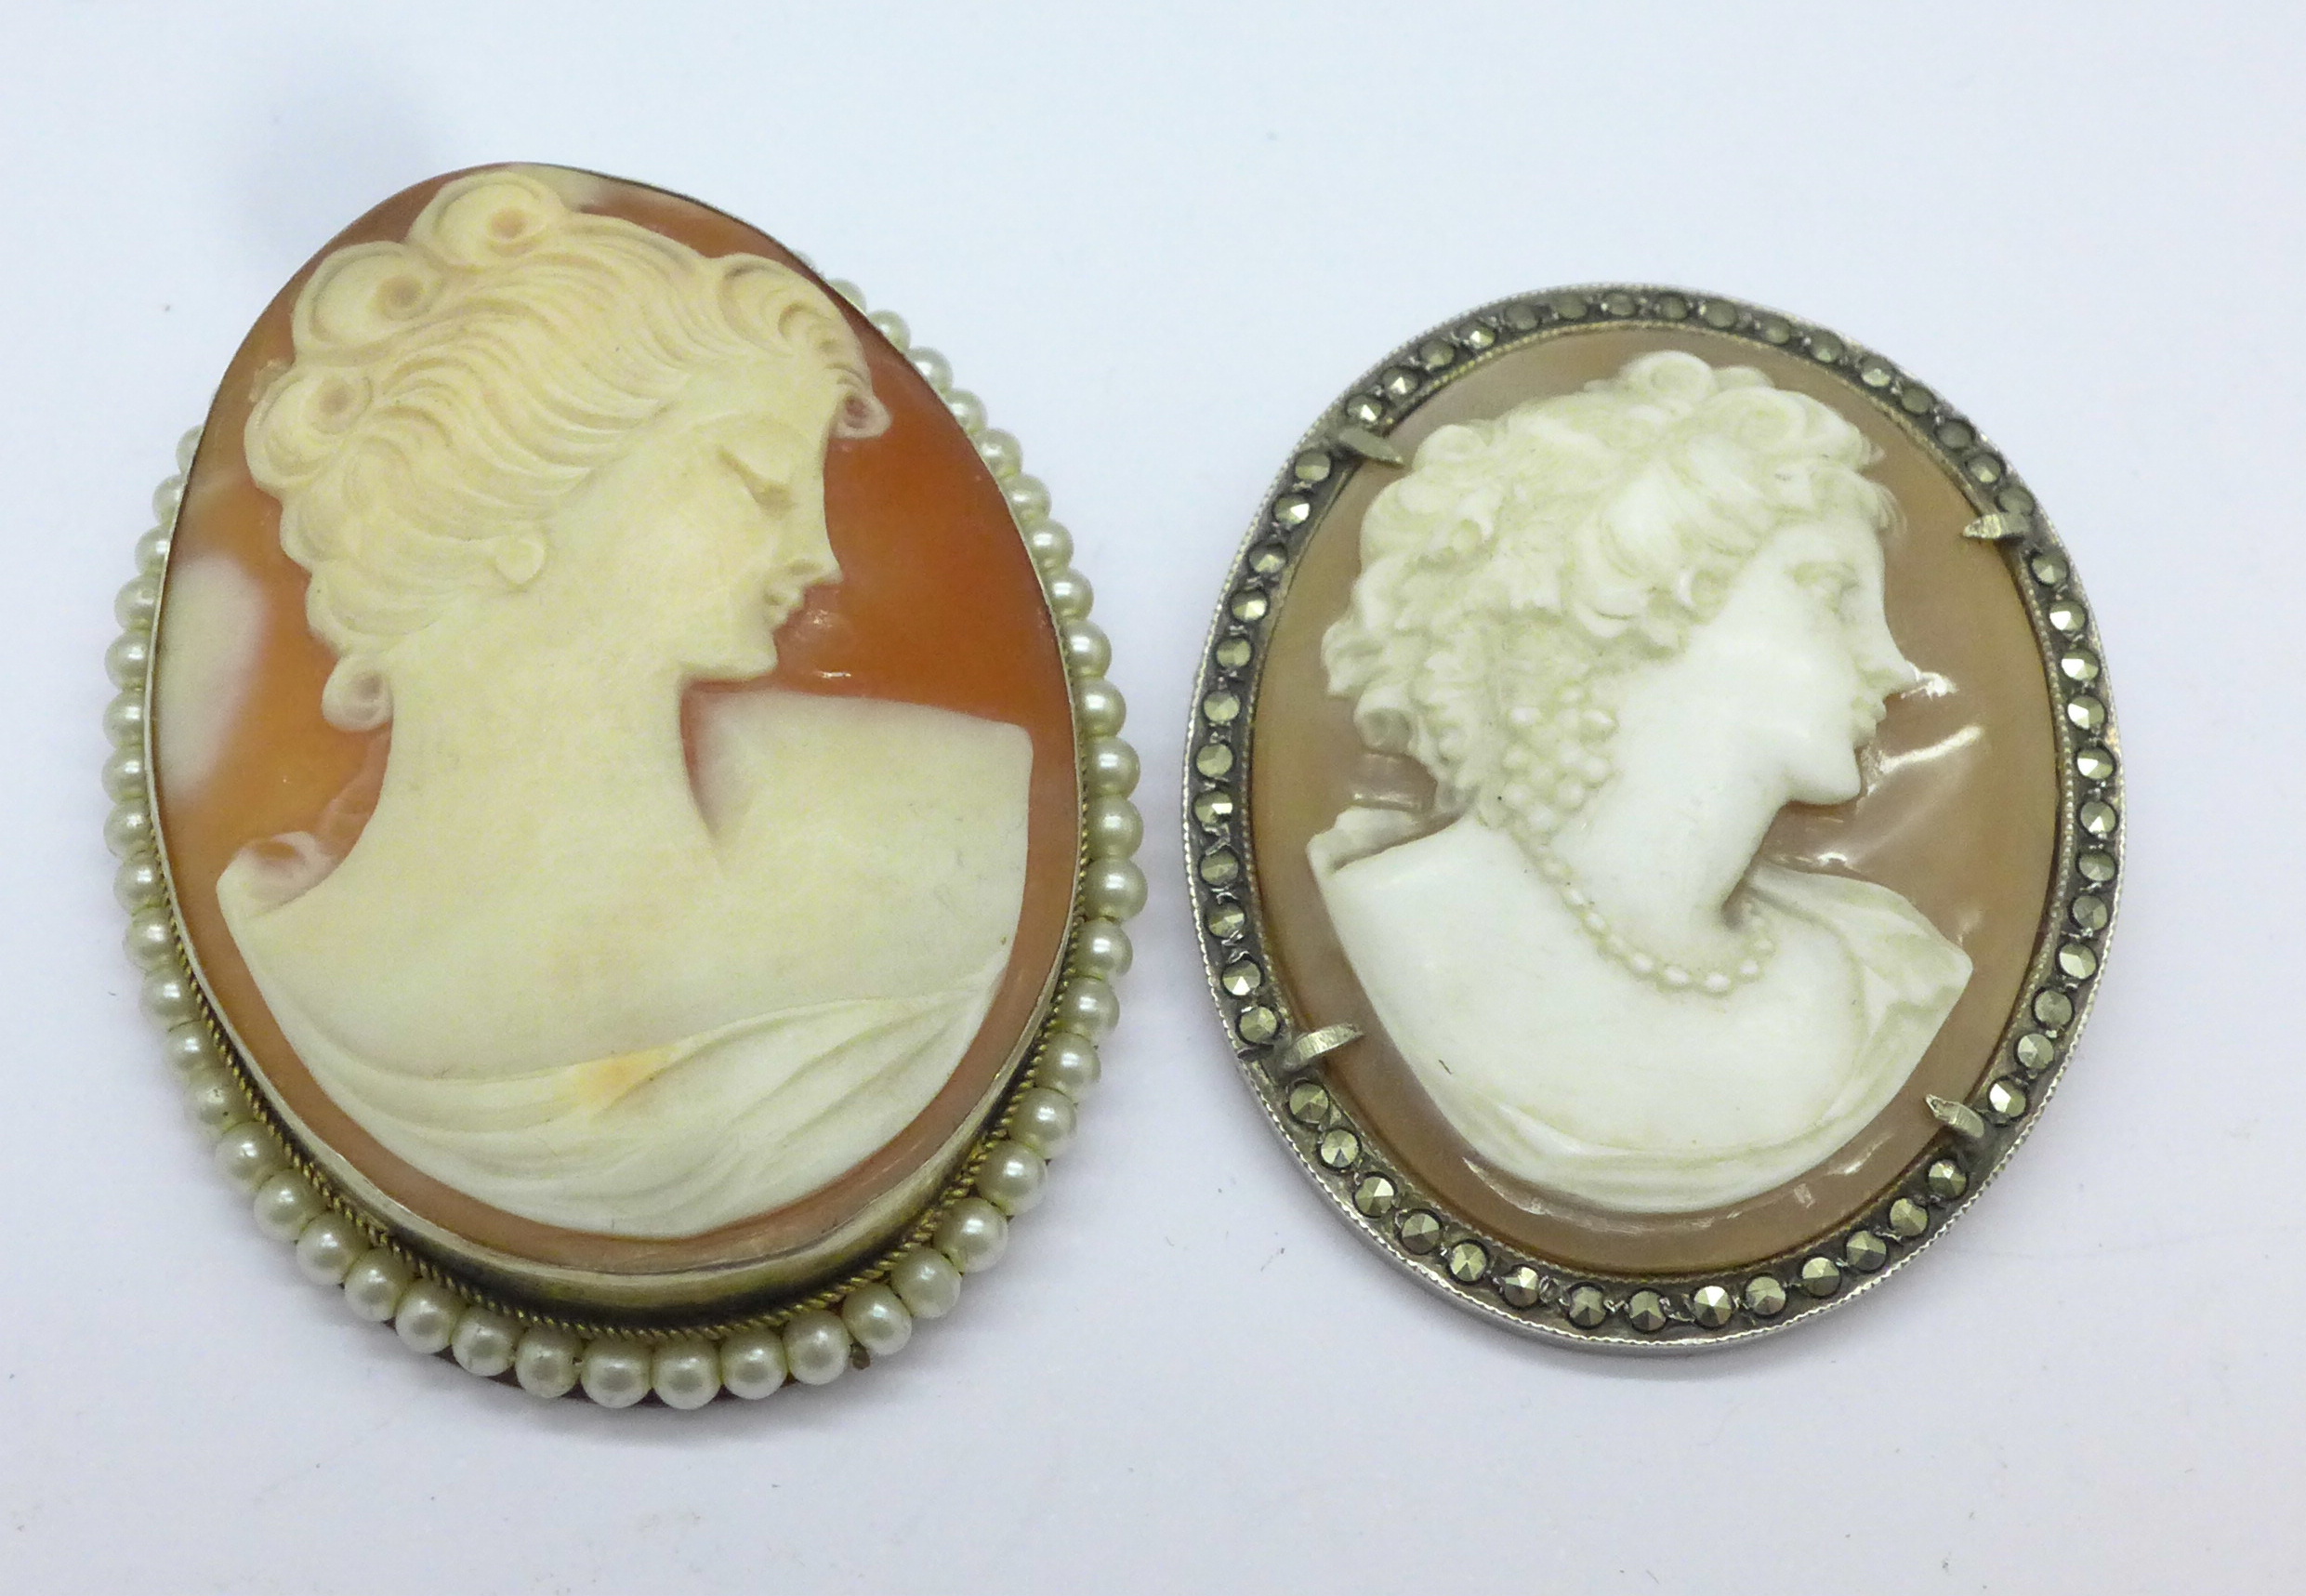 Two silver cameo brooches or pendants